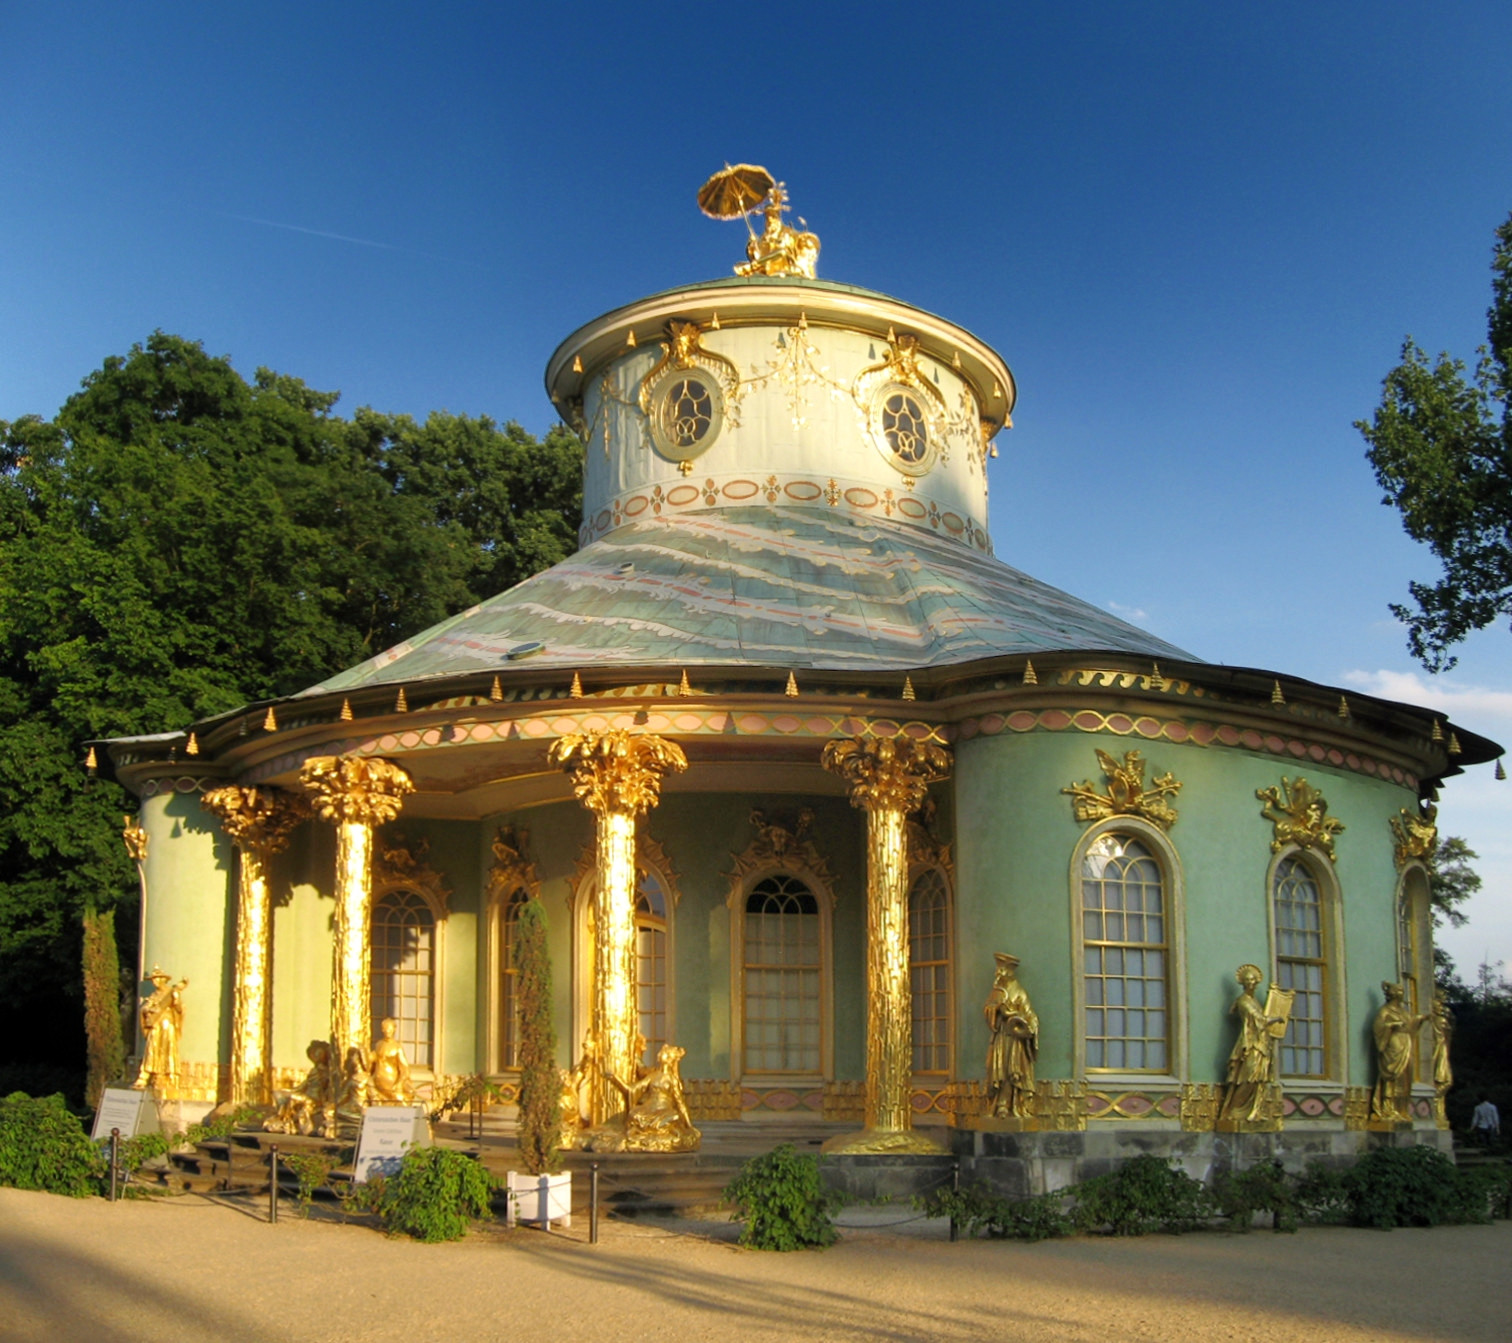 The Chinese House, designed by Johann Gottfried Büring between 1755 and 1764; a pavilion in the Chinoiserie style: a mixture of rococo elements coupled with Oriental architecture.